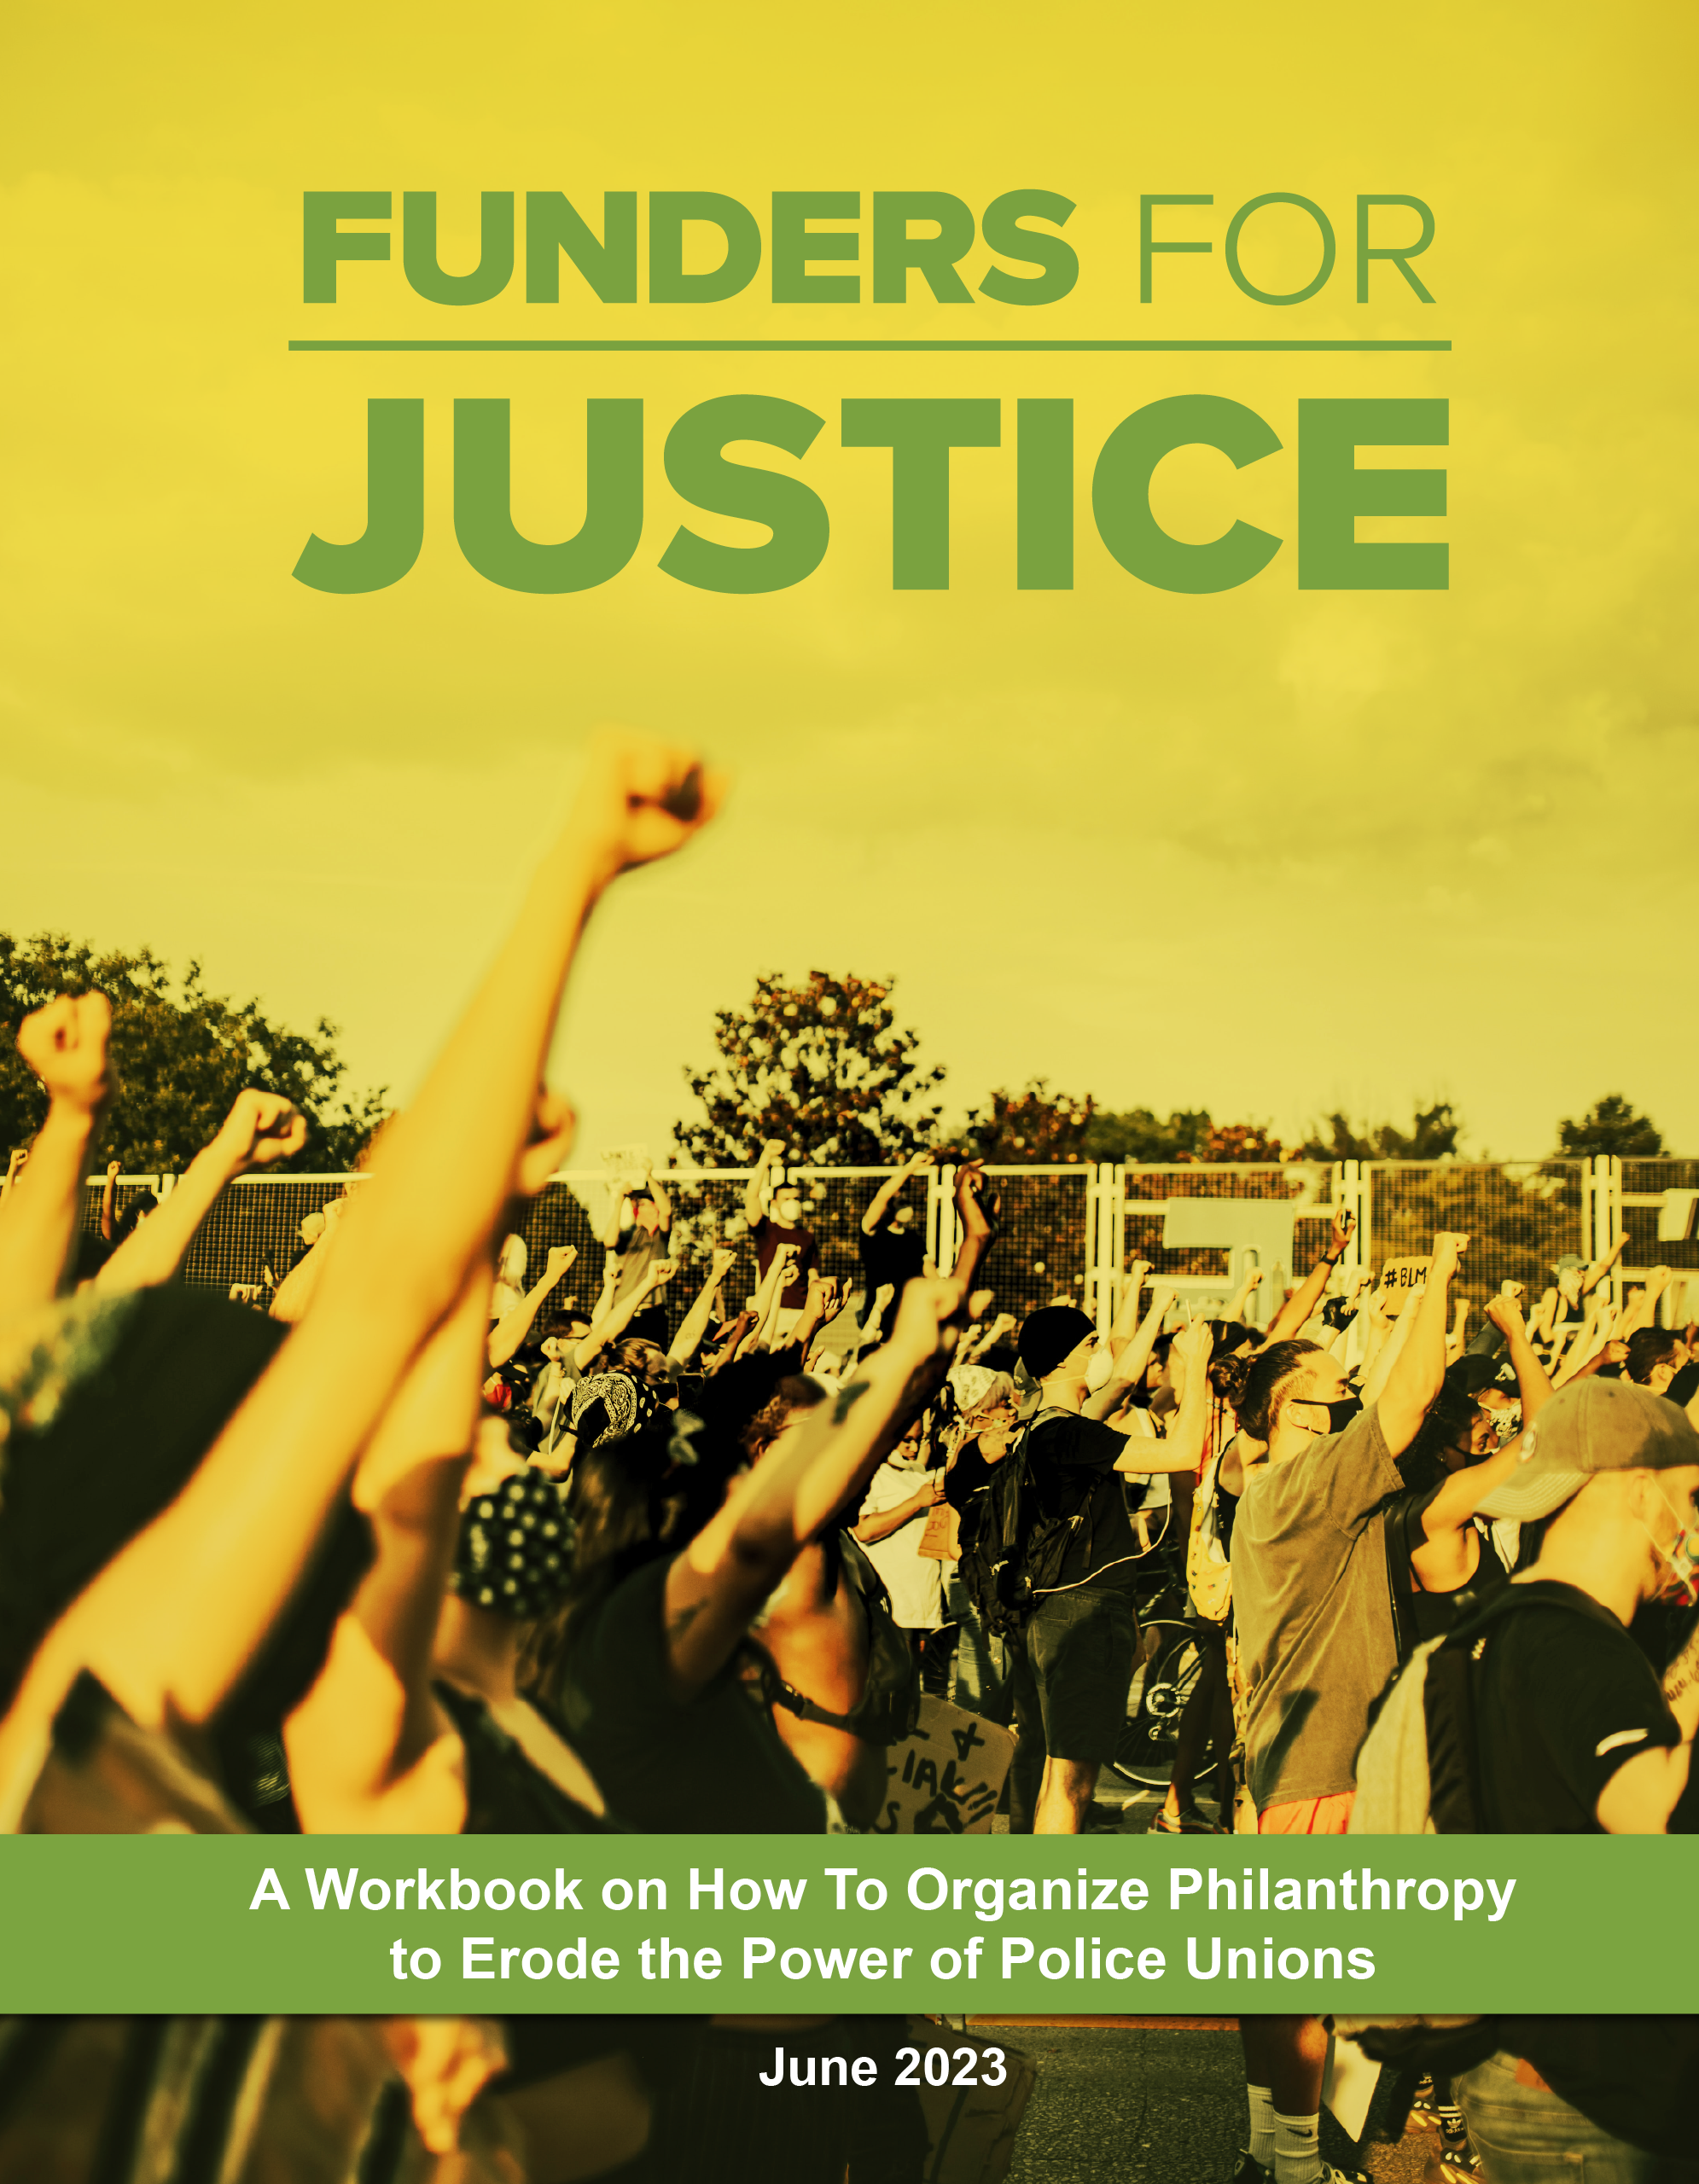 Protected: Eroding the Power of Police Unions Workbook